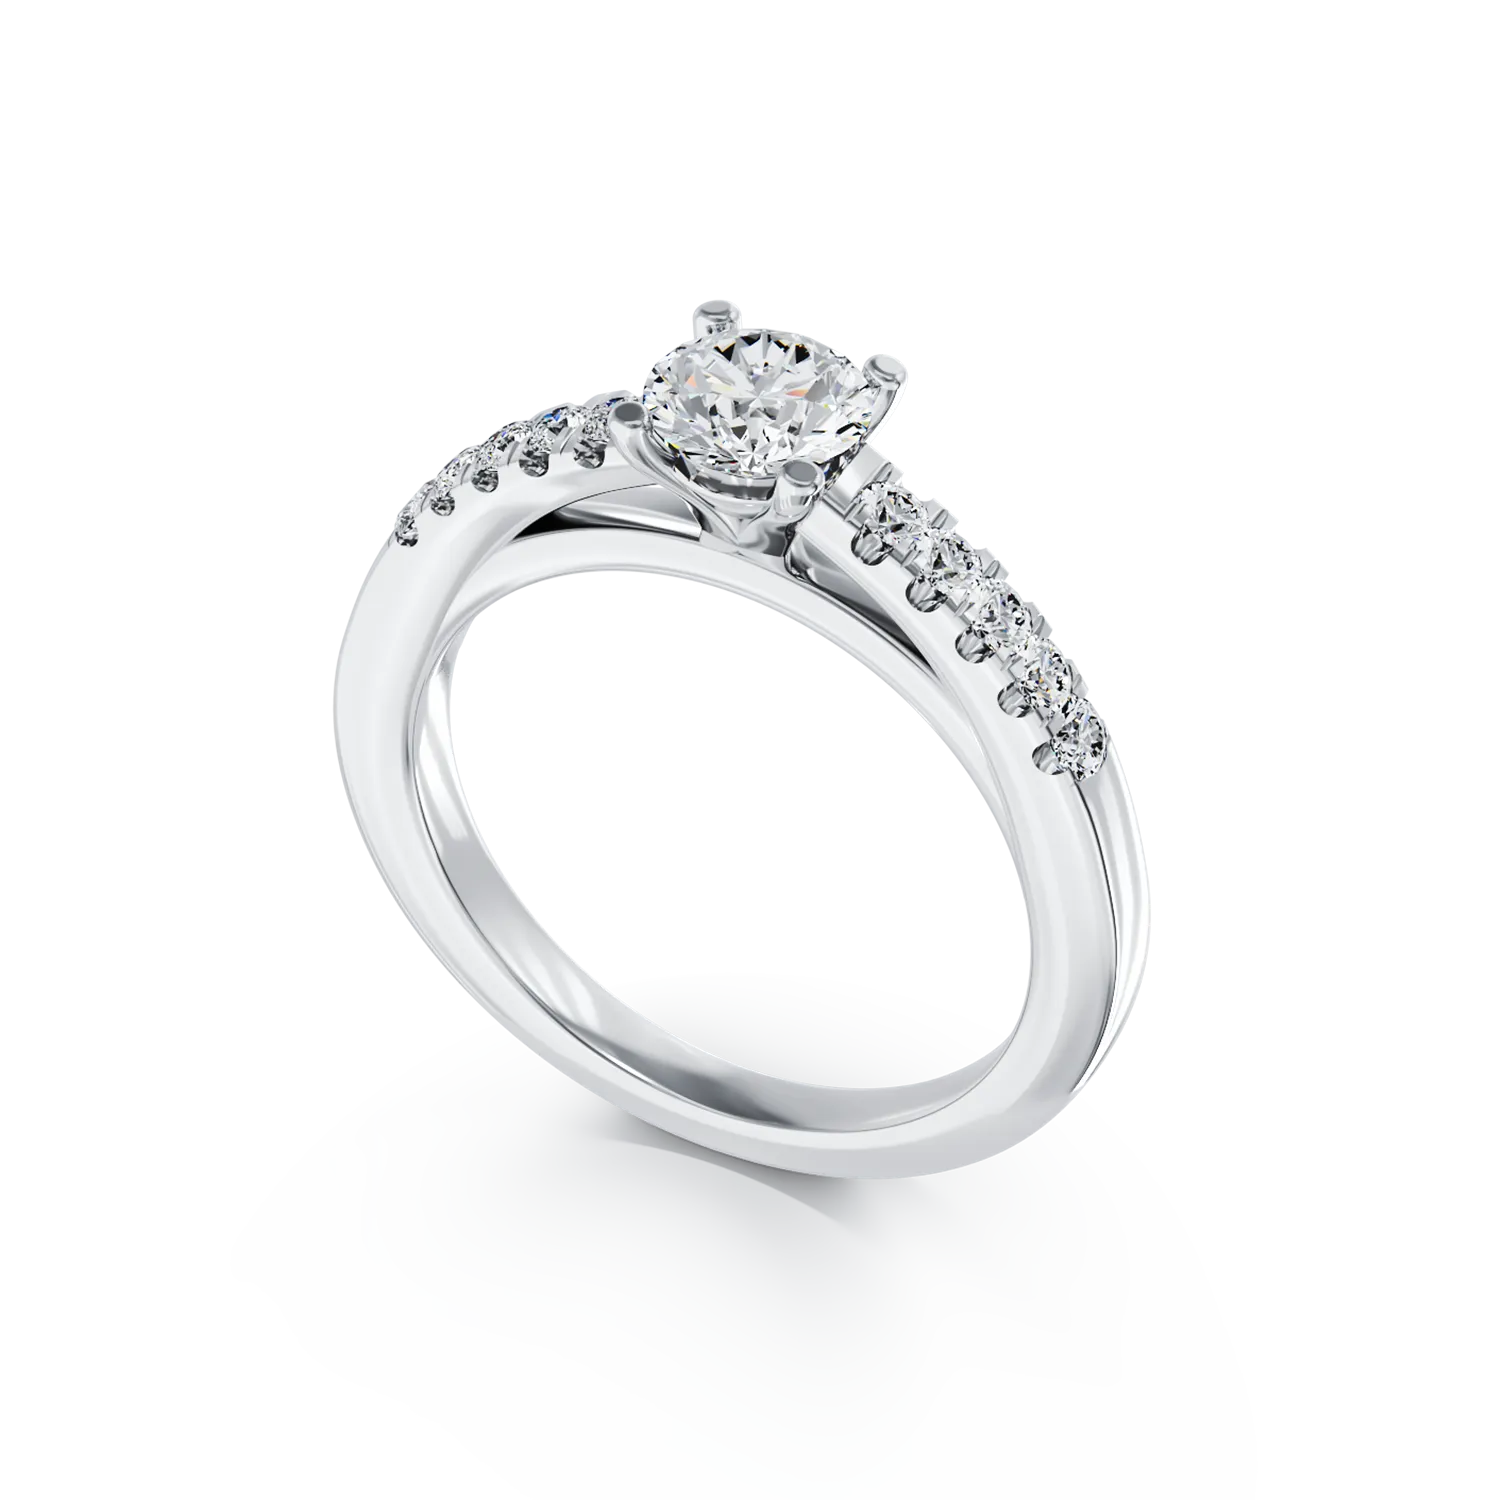 18K white gold engagement ring with 0.5ct diamond and 0.15ct diamonds